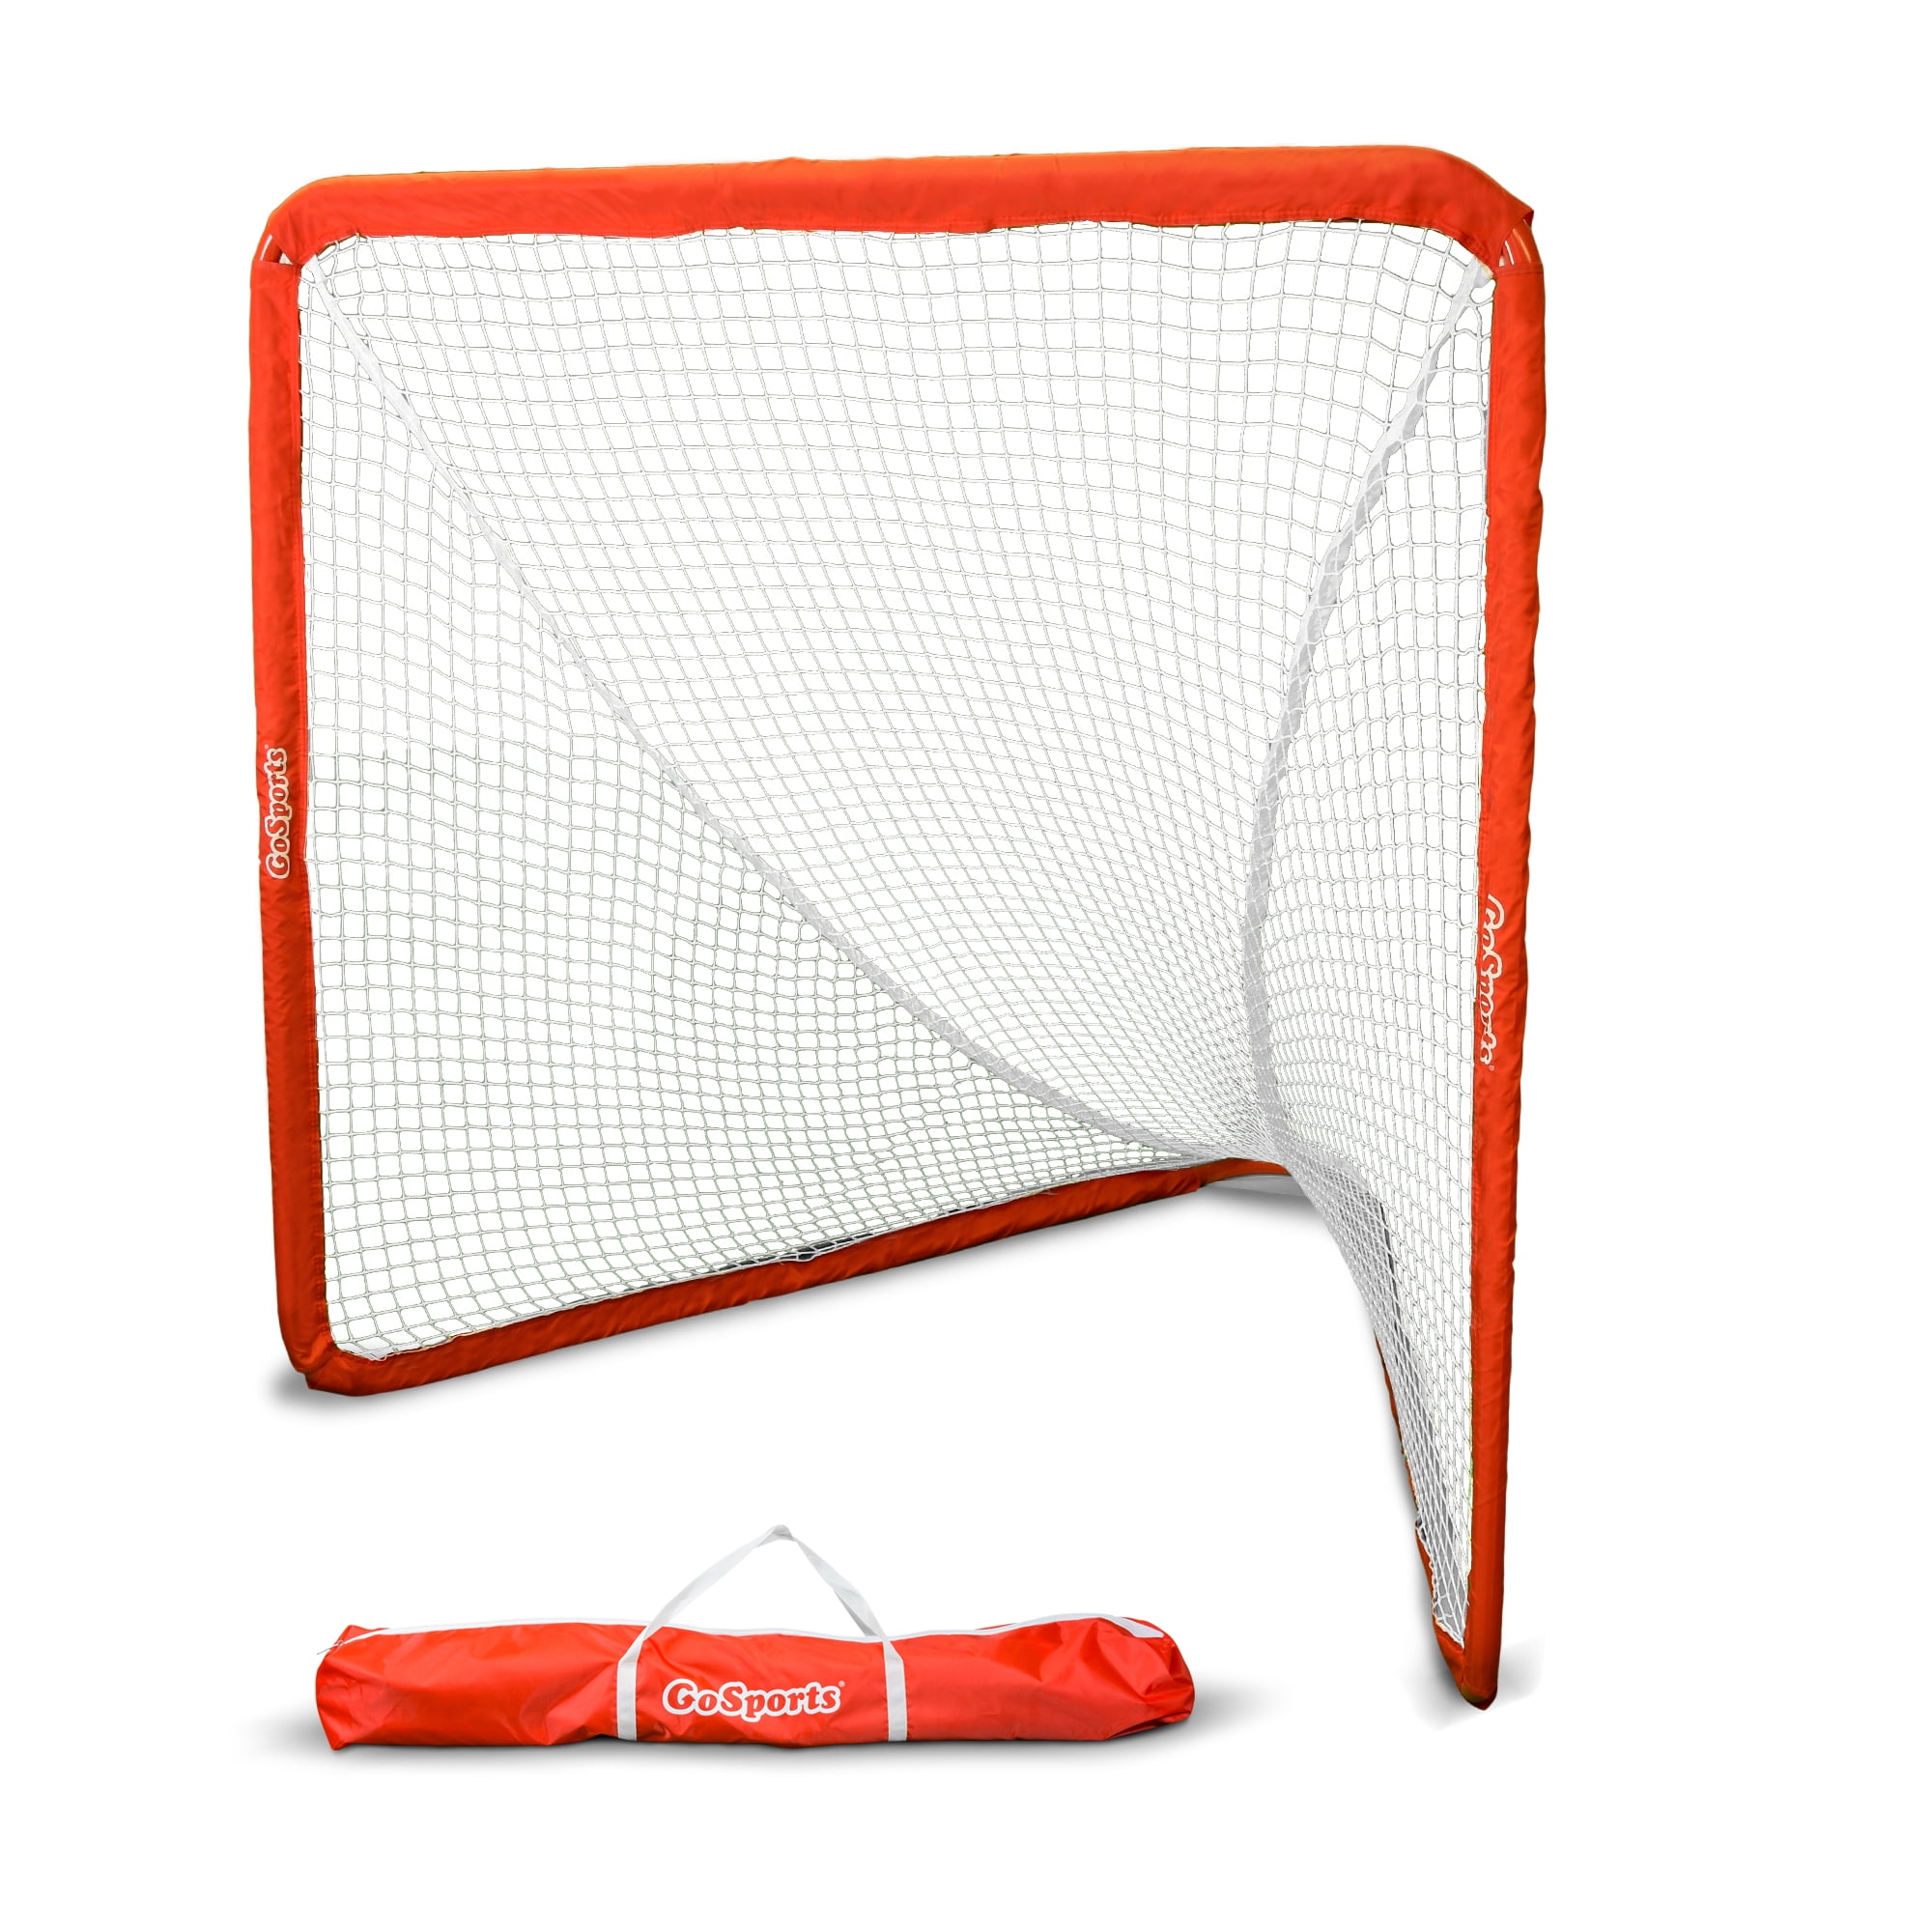 The Only Truly Portable Lacrosse Goal for Kids and Adults Backyard Setup in Minutes GoSports Regulation 6 x 6 Lacrosse Net with Steel Frame 